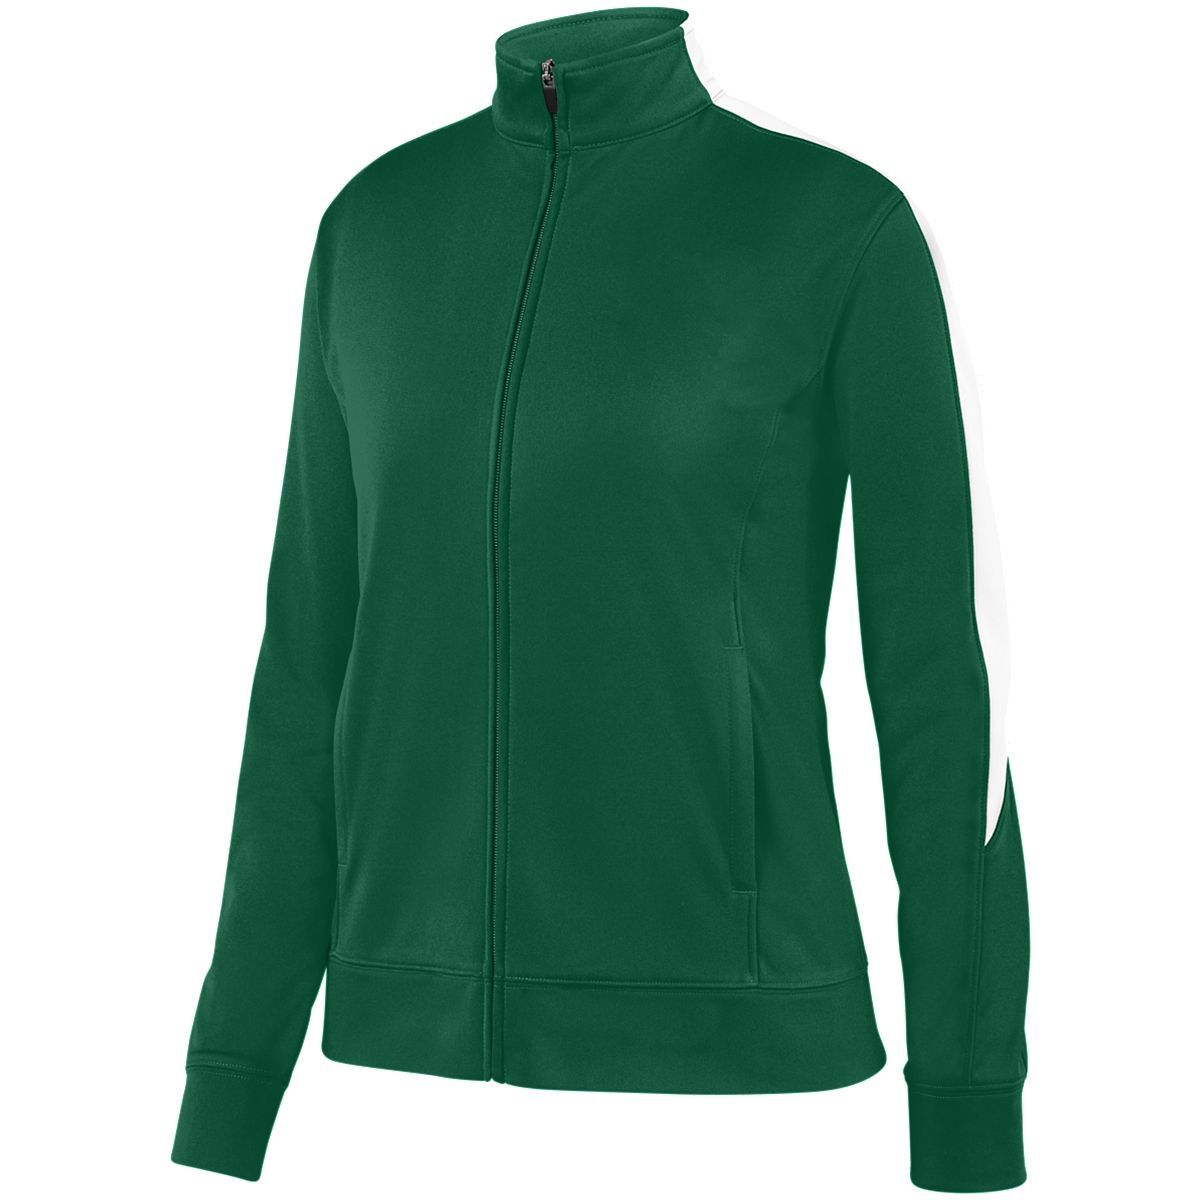 Augusta Sportswear Ladies Medalist Jacket 2.0 in Dark Green/White  -Part of the Ladies, Ladies-Jacket, Augusta-Products, Outerwear product lines at KanaleyCreations.com